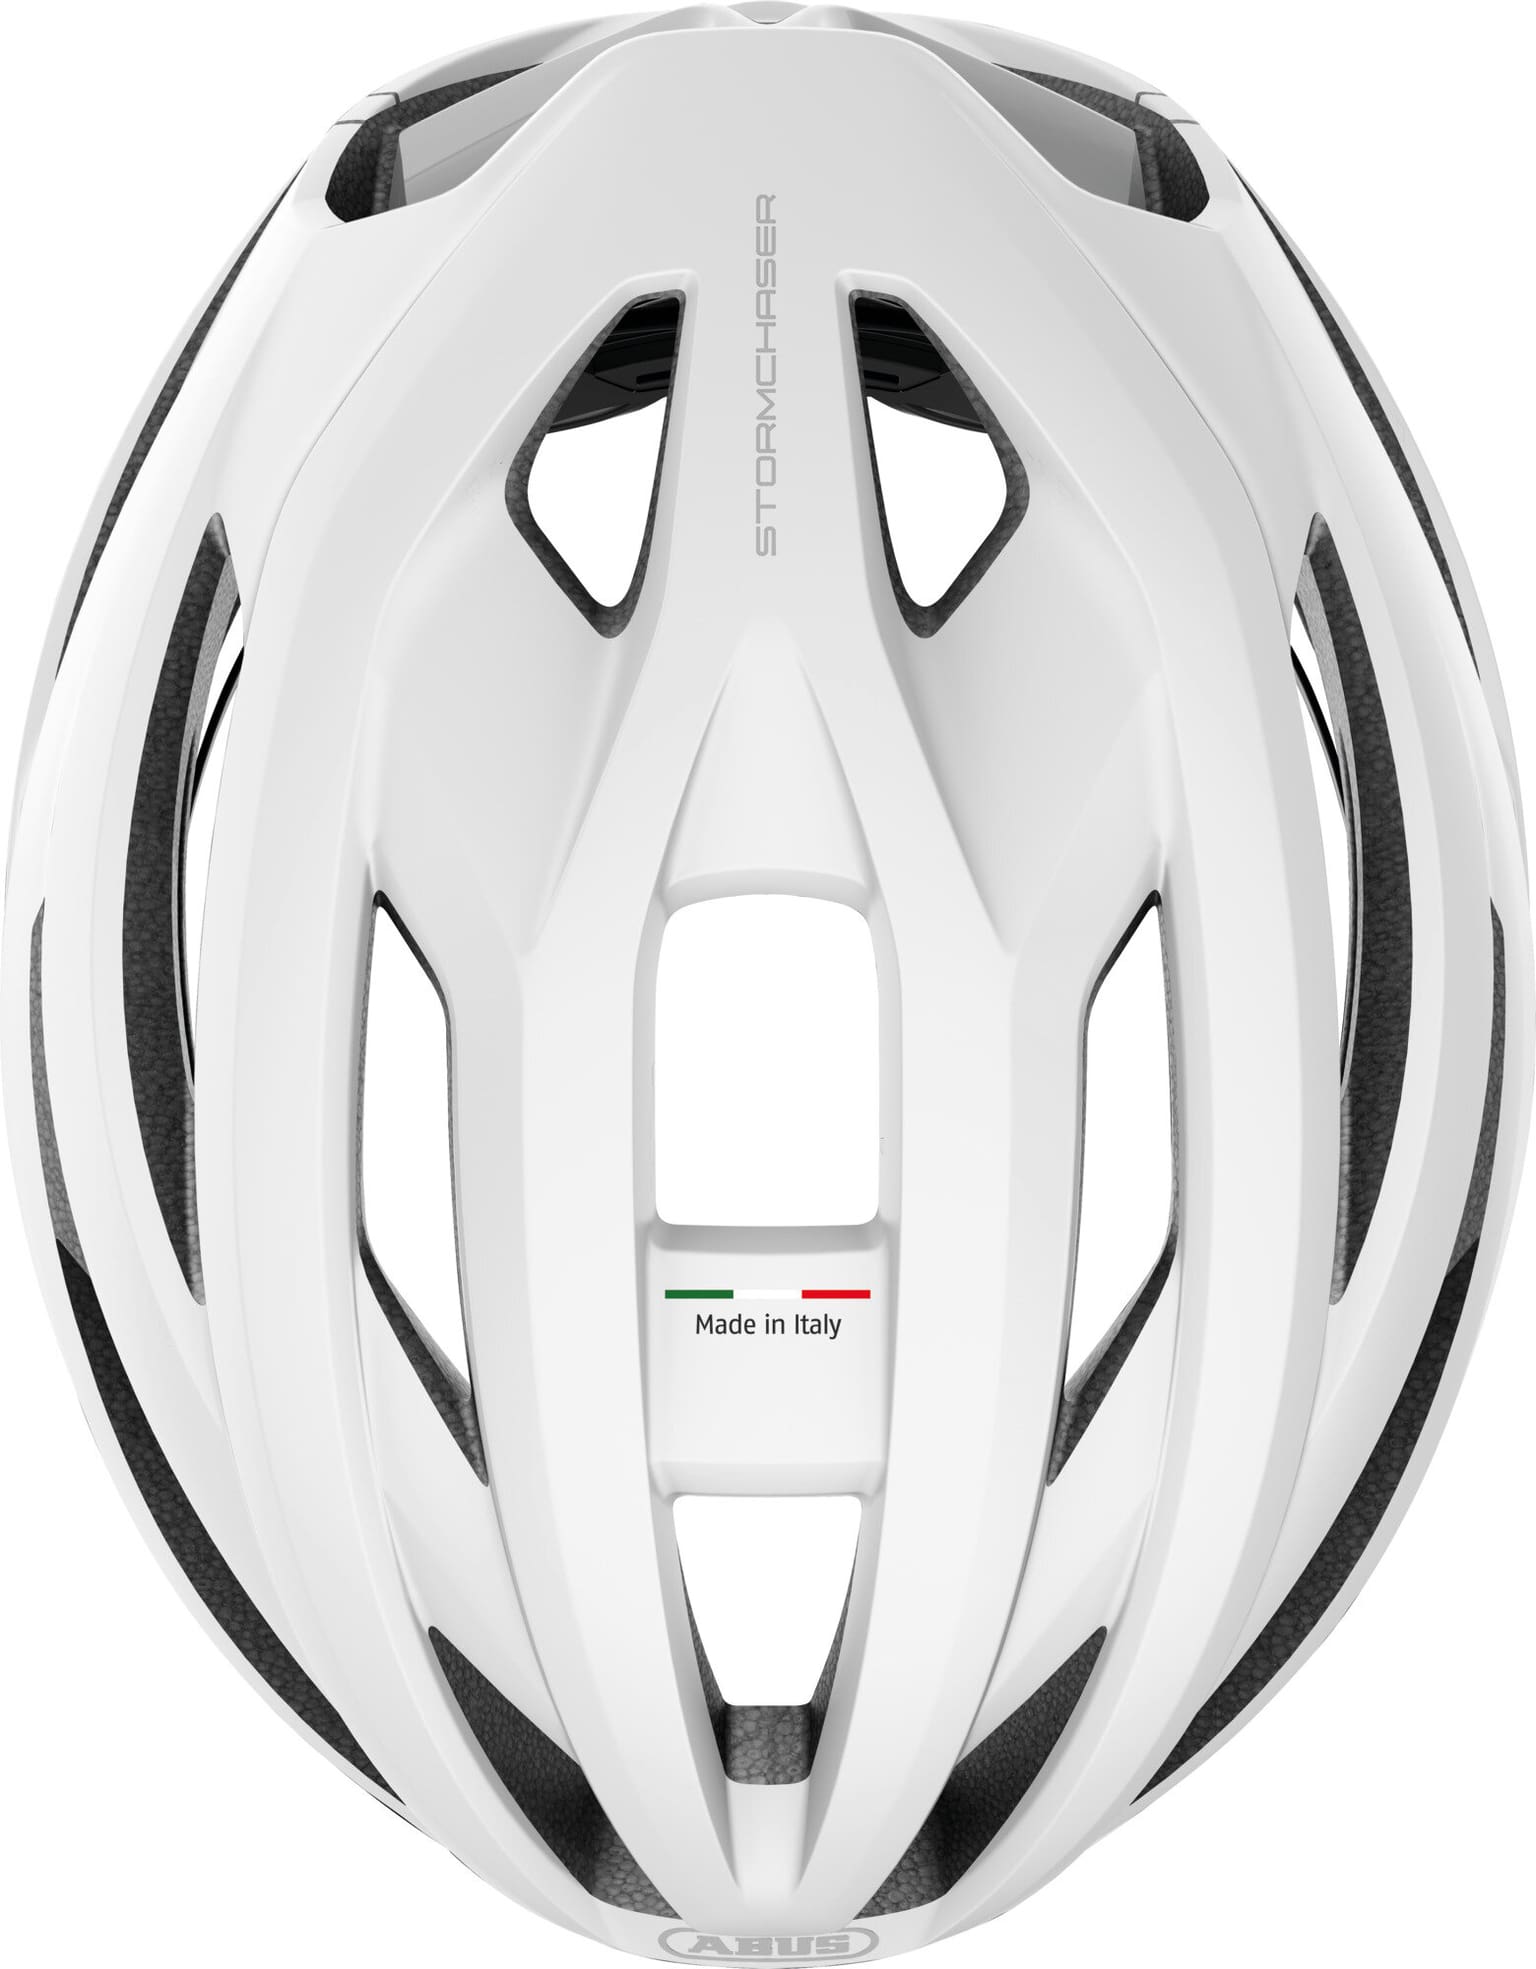 Abus Abus StormChaser ACE Velohelm weiss 6